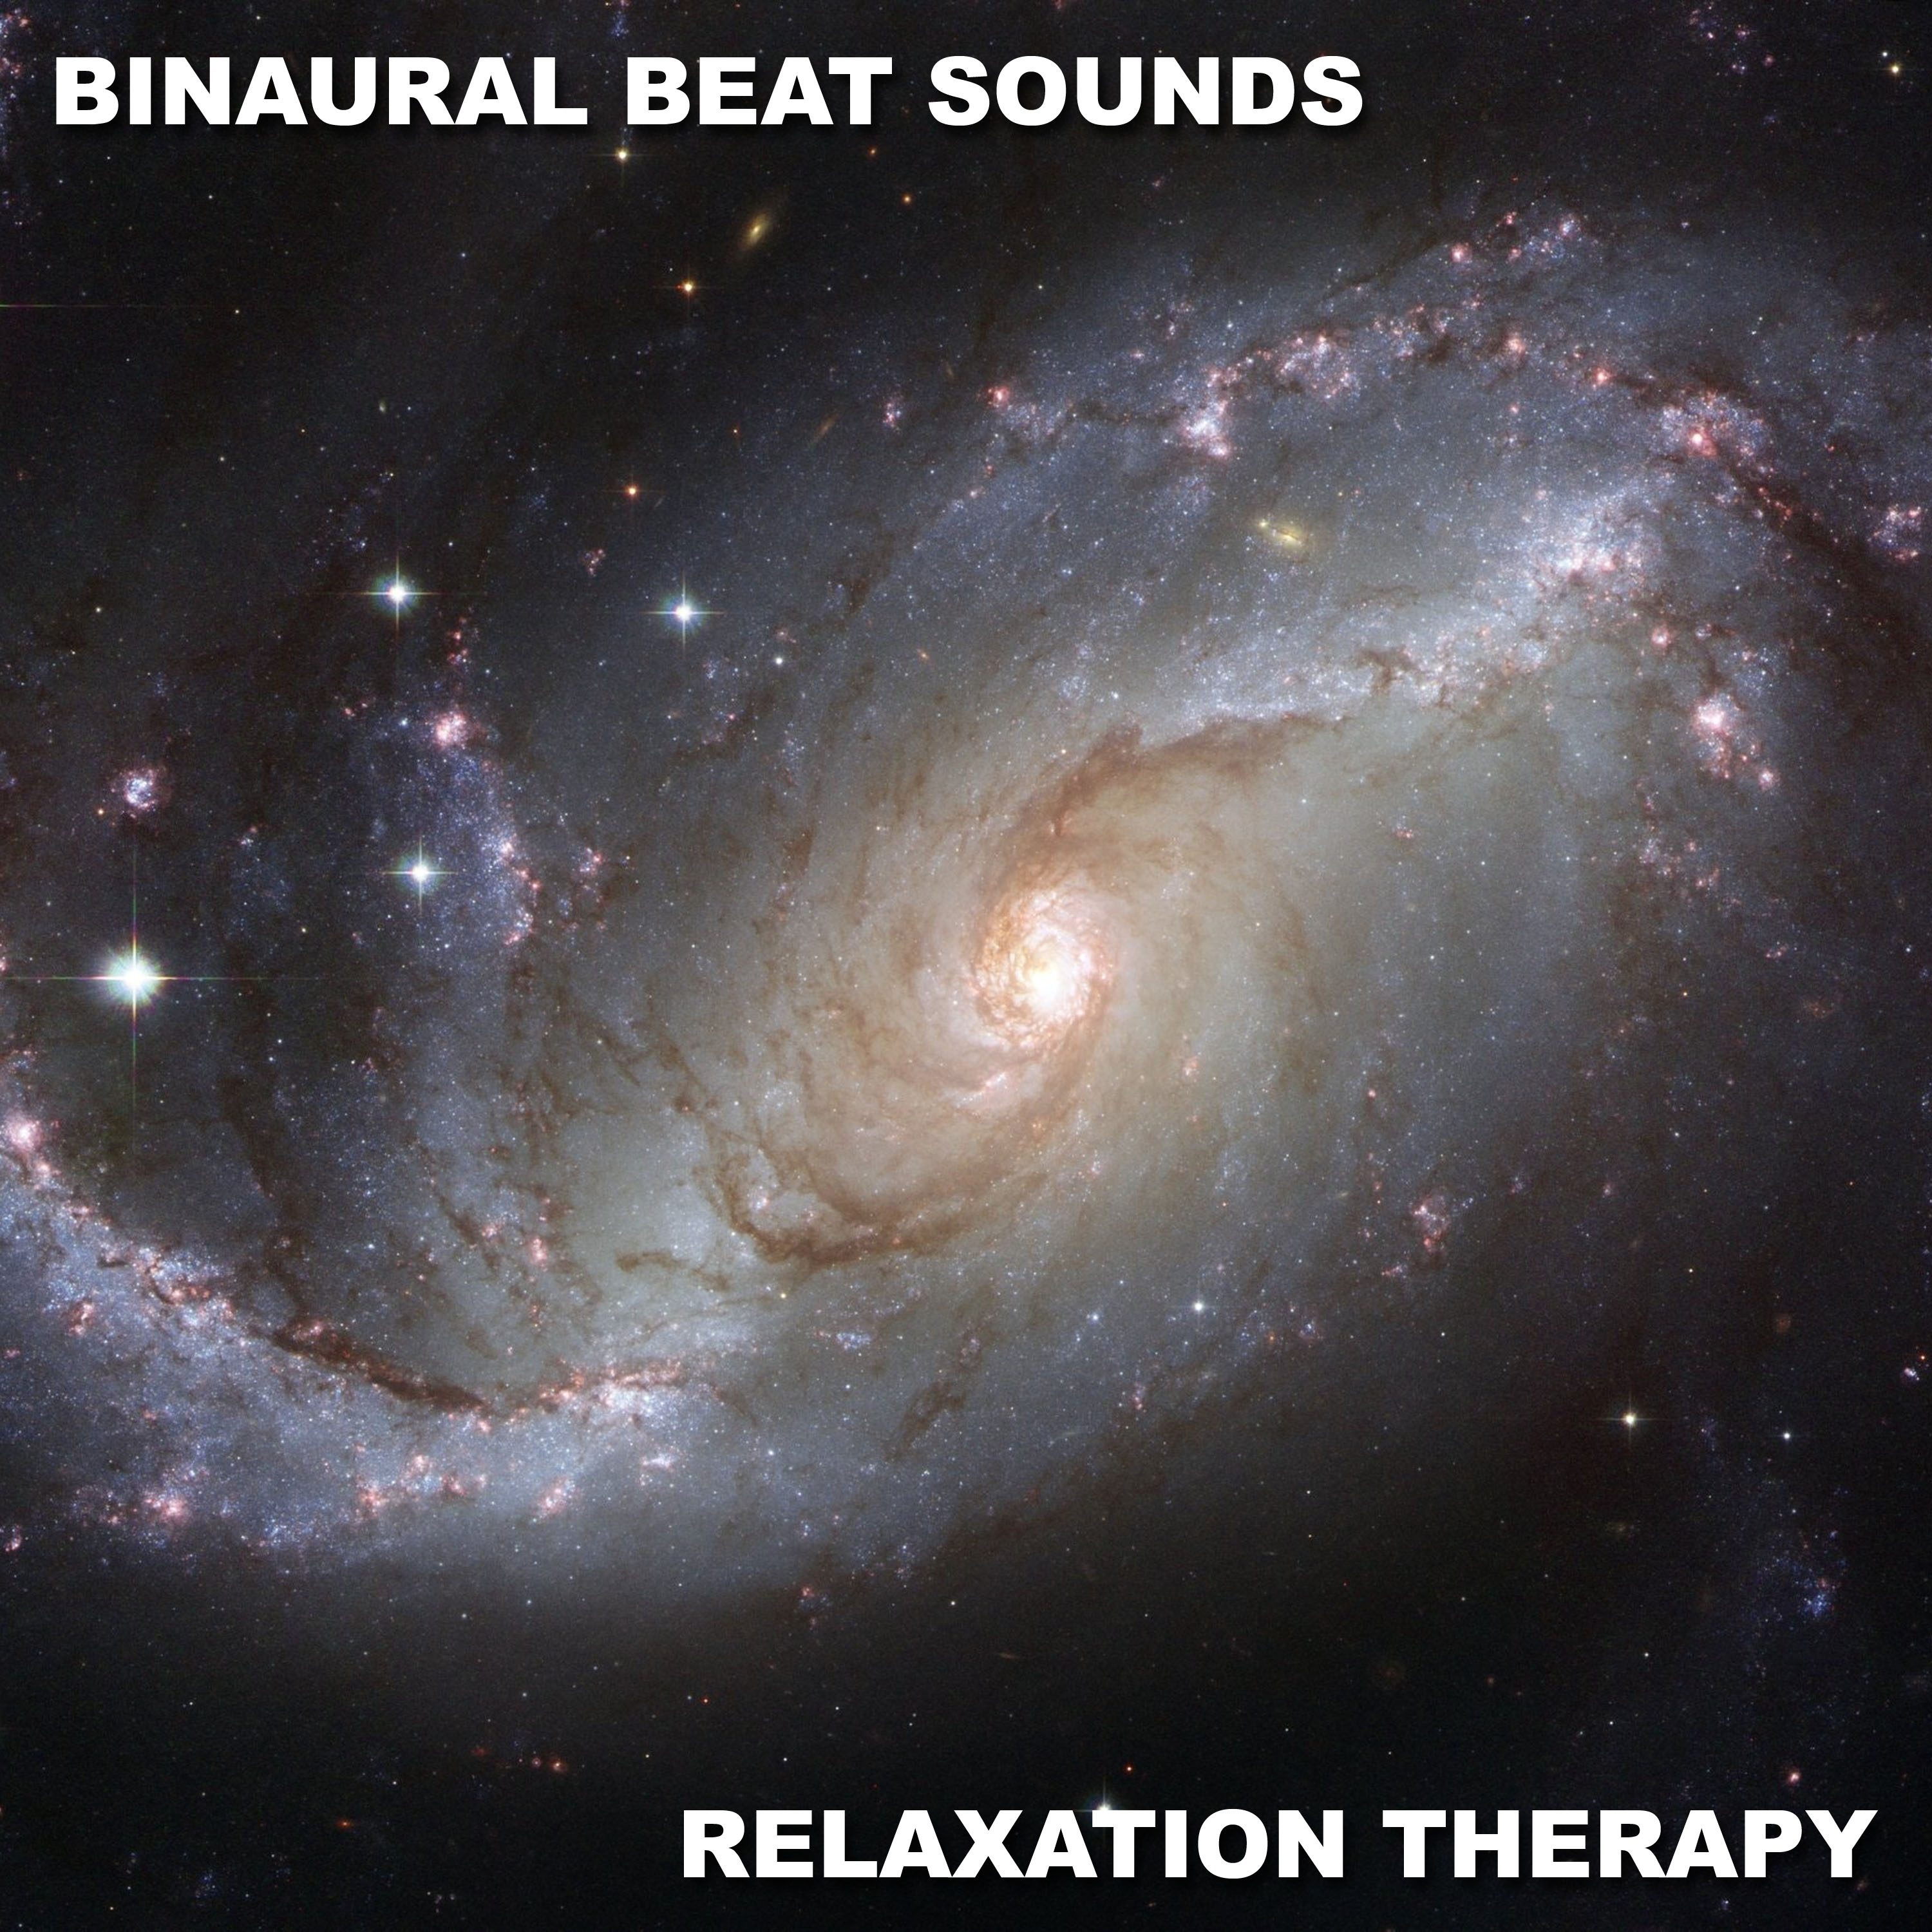 16 Binaural Beat Sounds for Relaxation Therapy